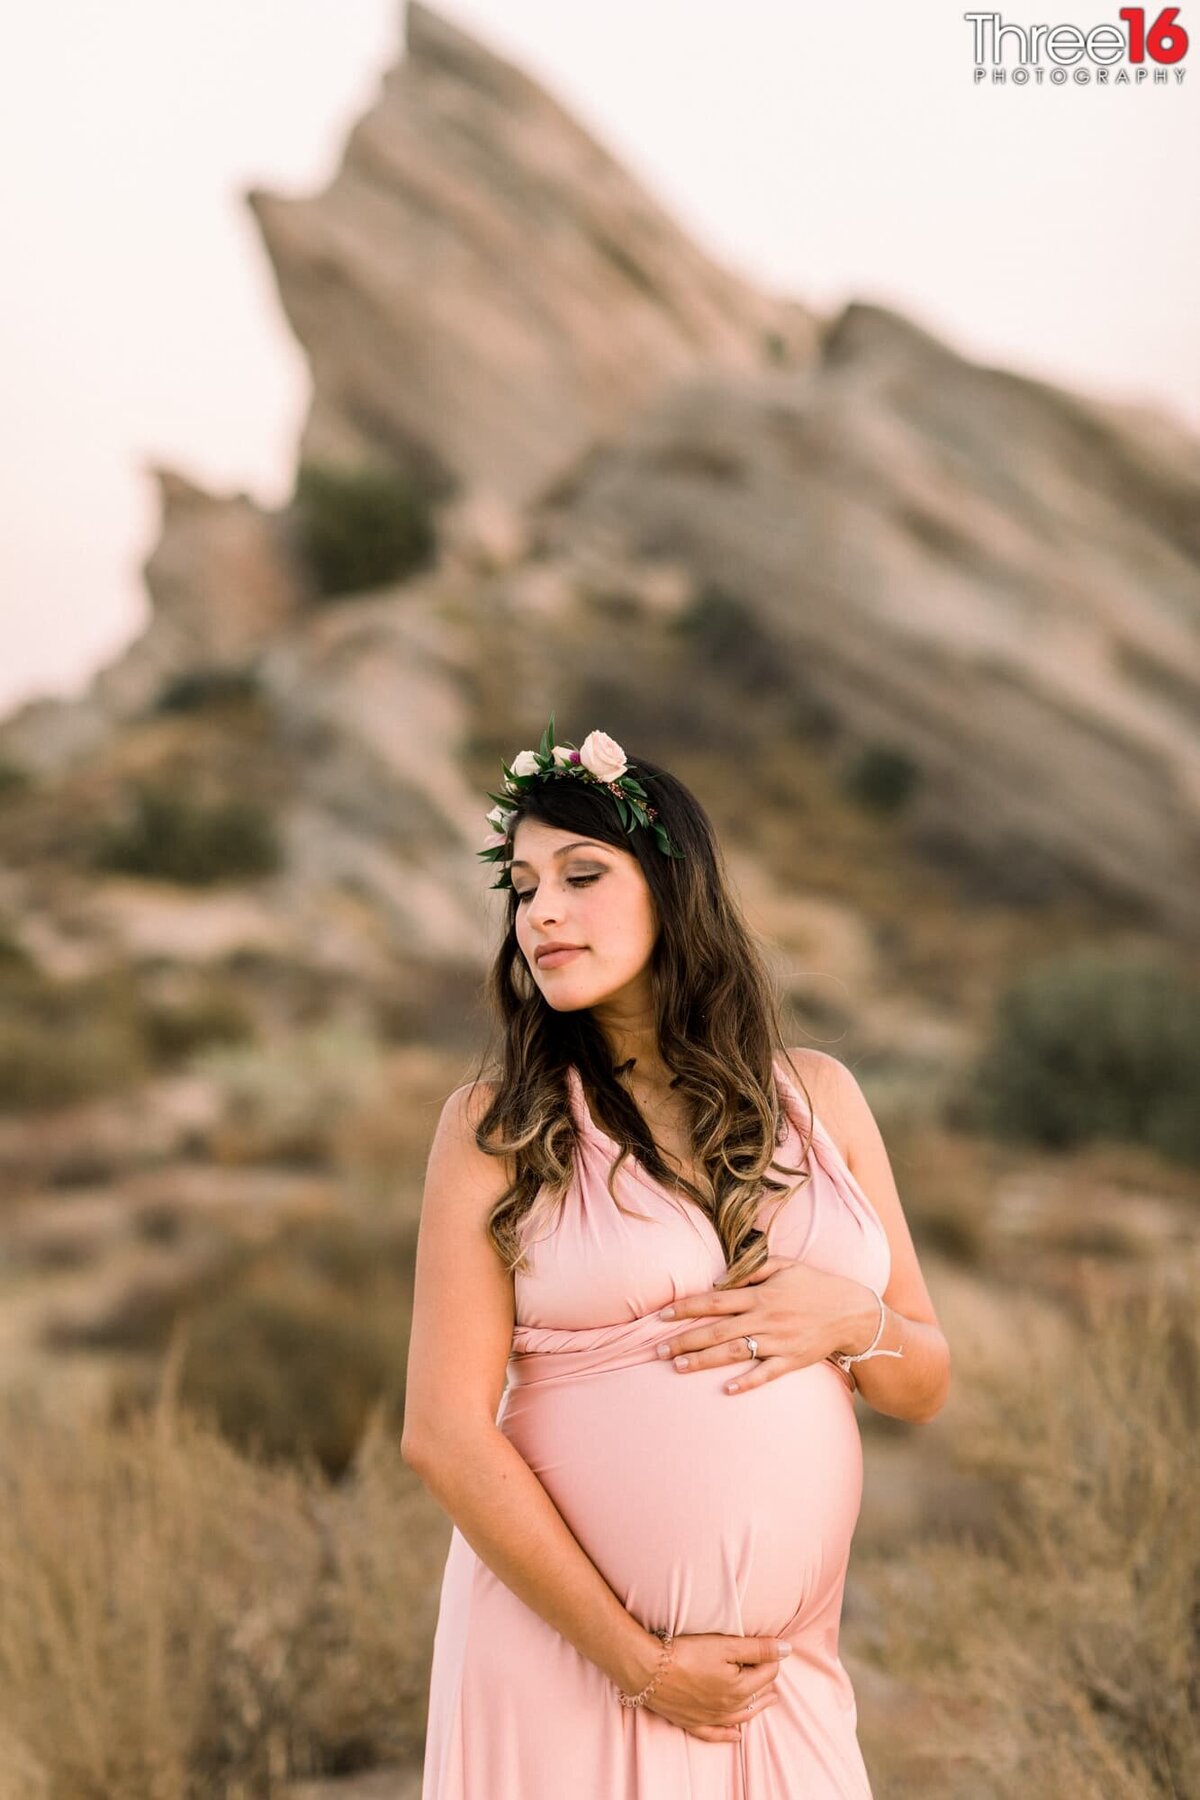 Mom to be poses highlighting her pregnancy during photo session